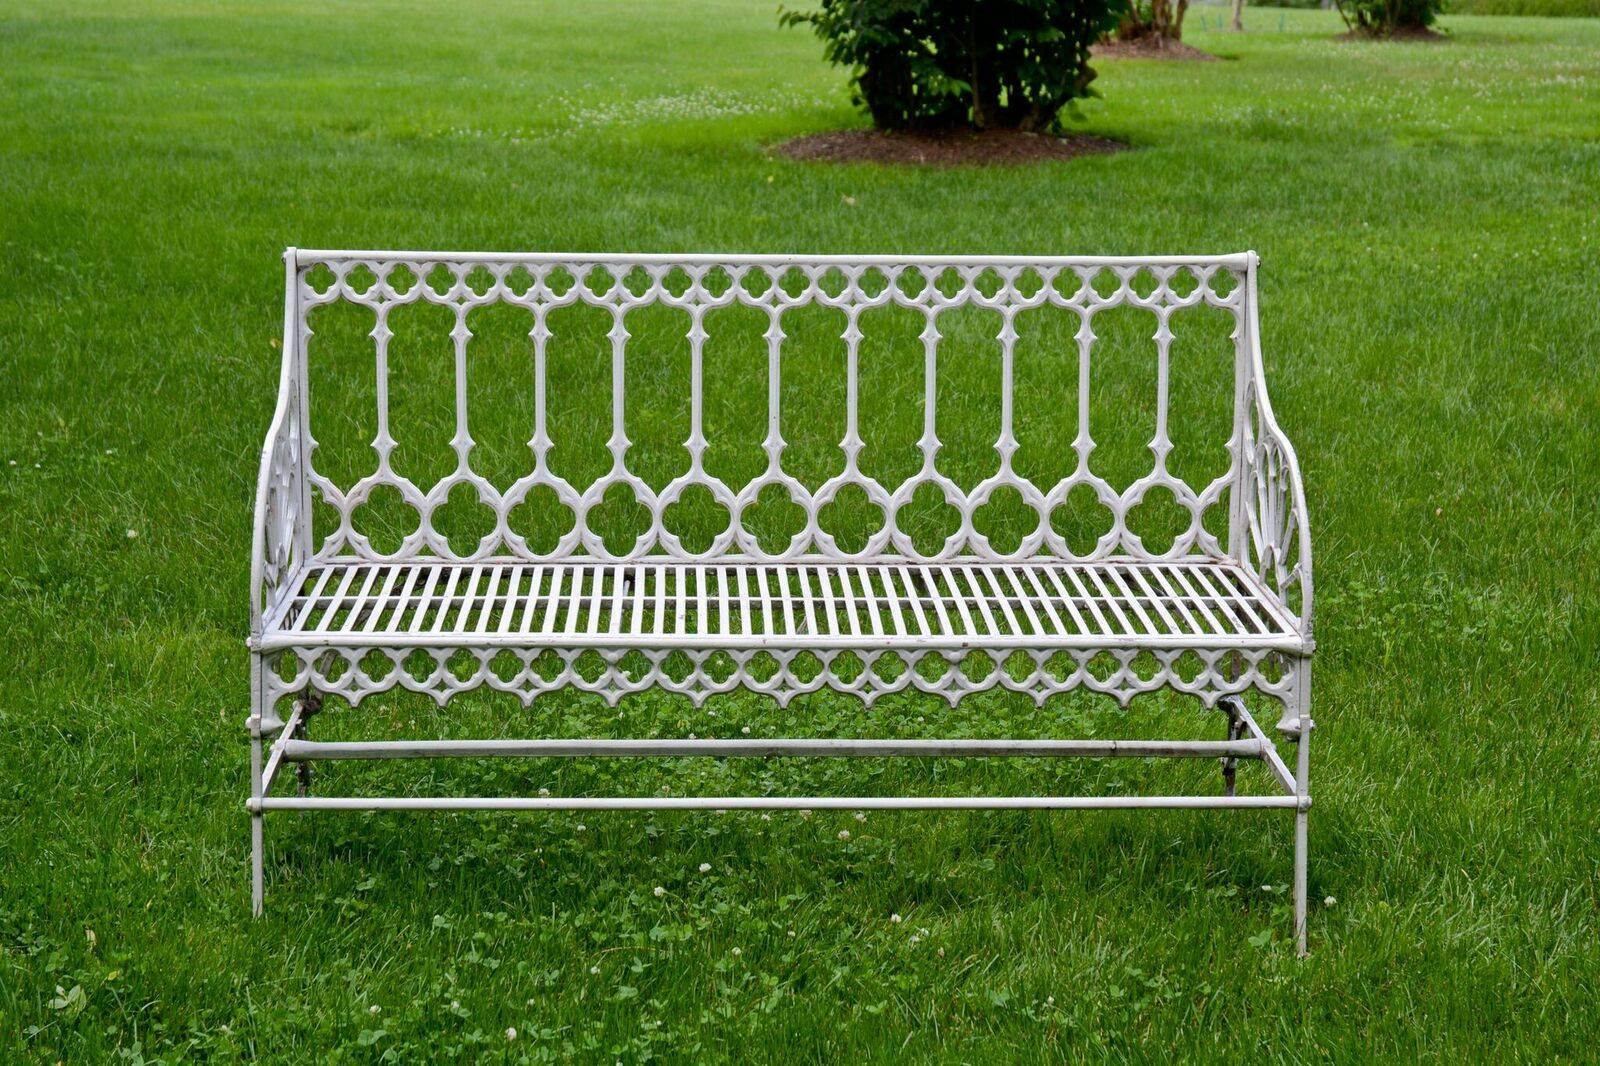 A cast-iron seat in the Gothic style, with pierced seat, tracery on back and apron and radiating semi-circular pattern at arms, nearly identical to seat produced by the Val d’Osne foundry, but with a slimmer, finer Silhouette, possibly Scottish,